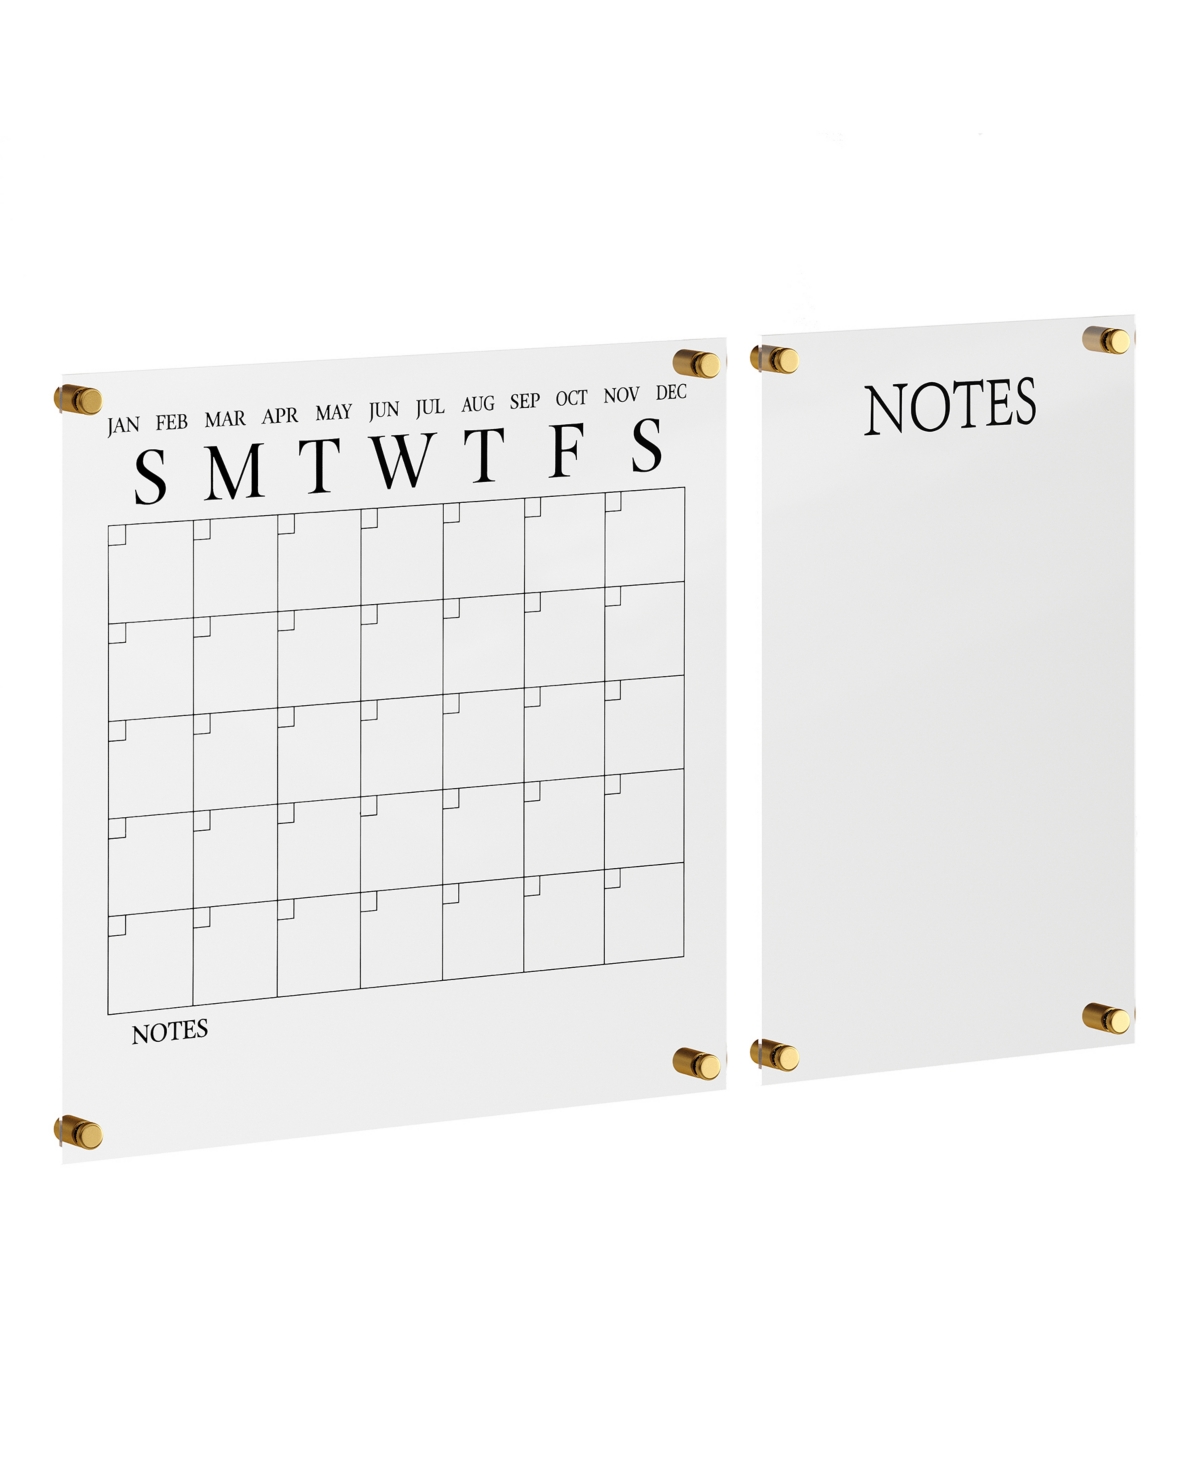 Grayson Acrylic Wall Calendar and Notes Board Set with Dry Erase Marker and Mounting Hardware - Clear, Black